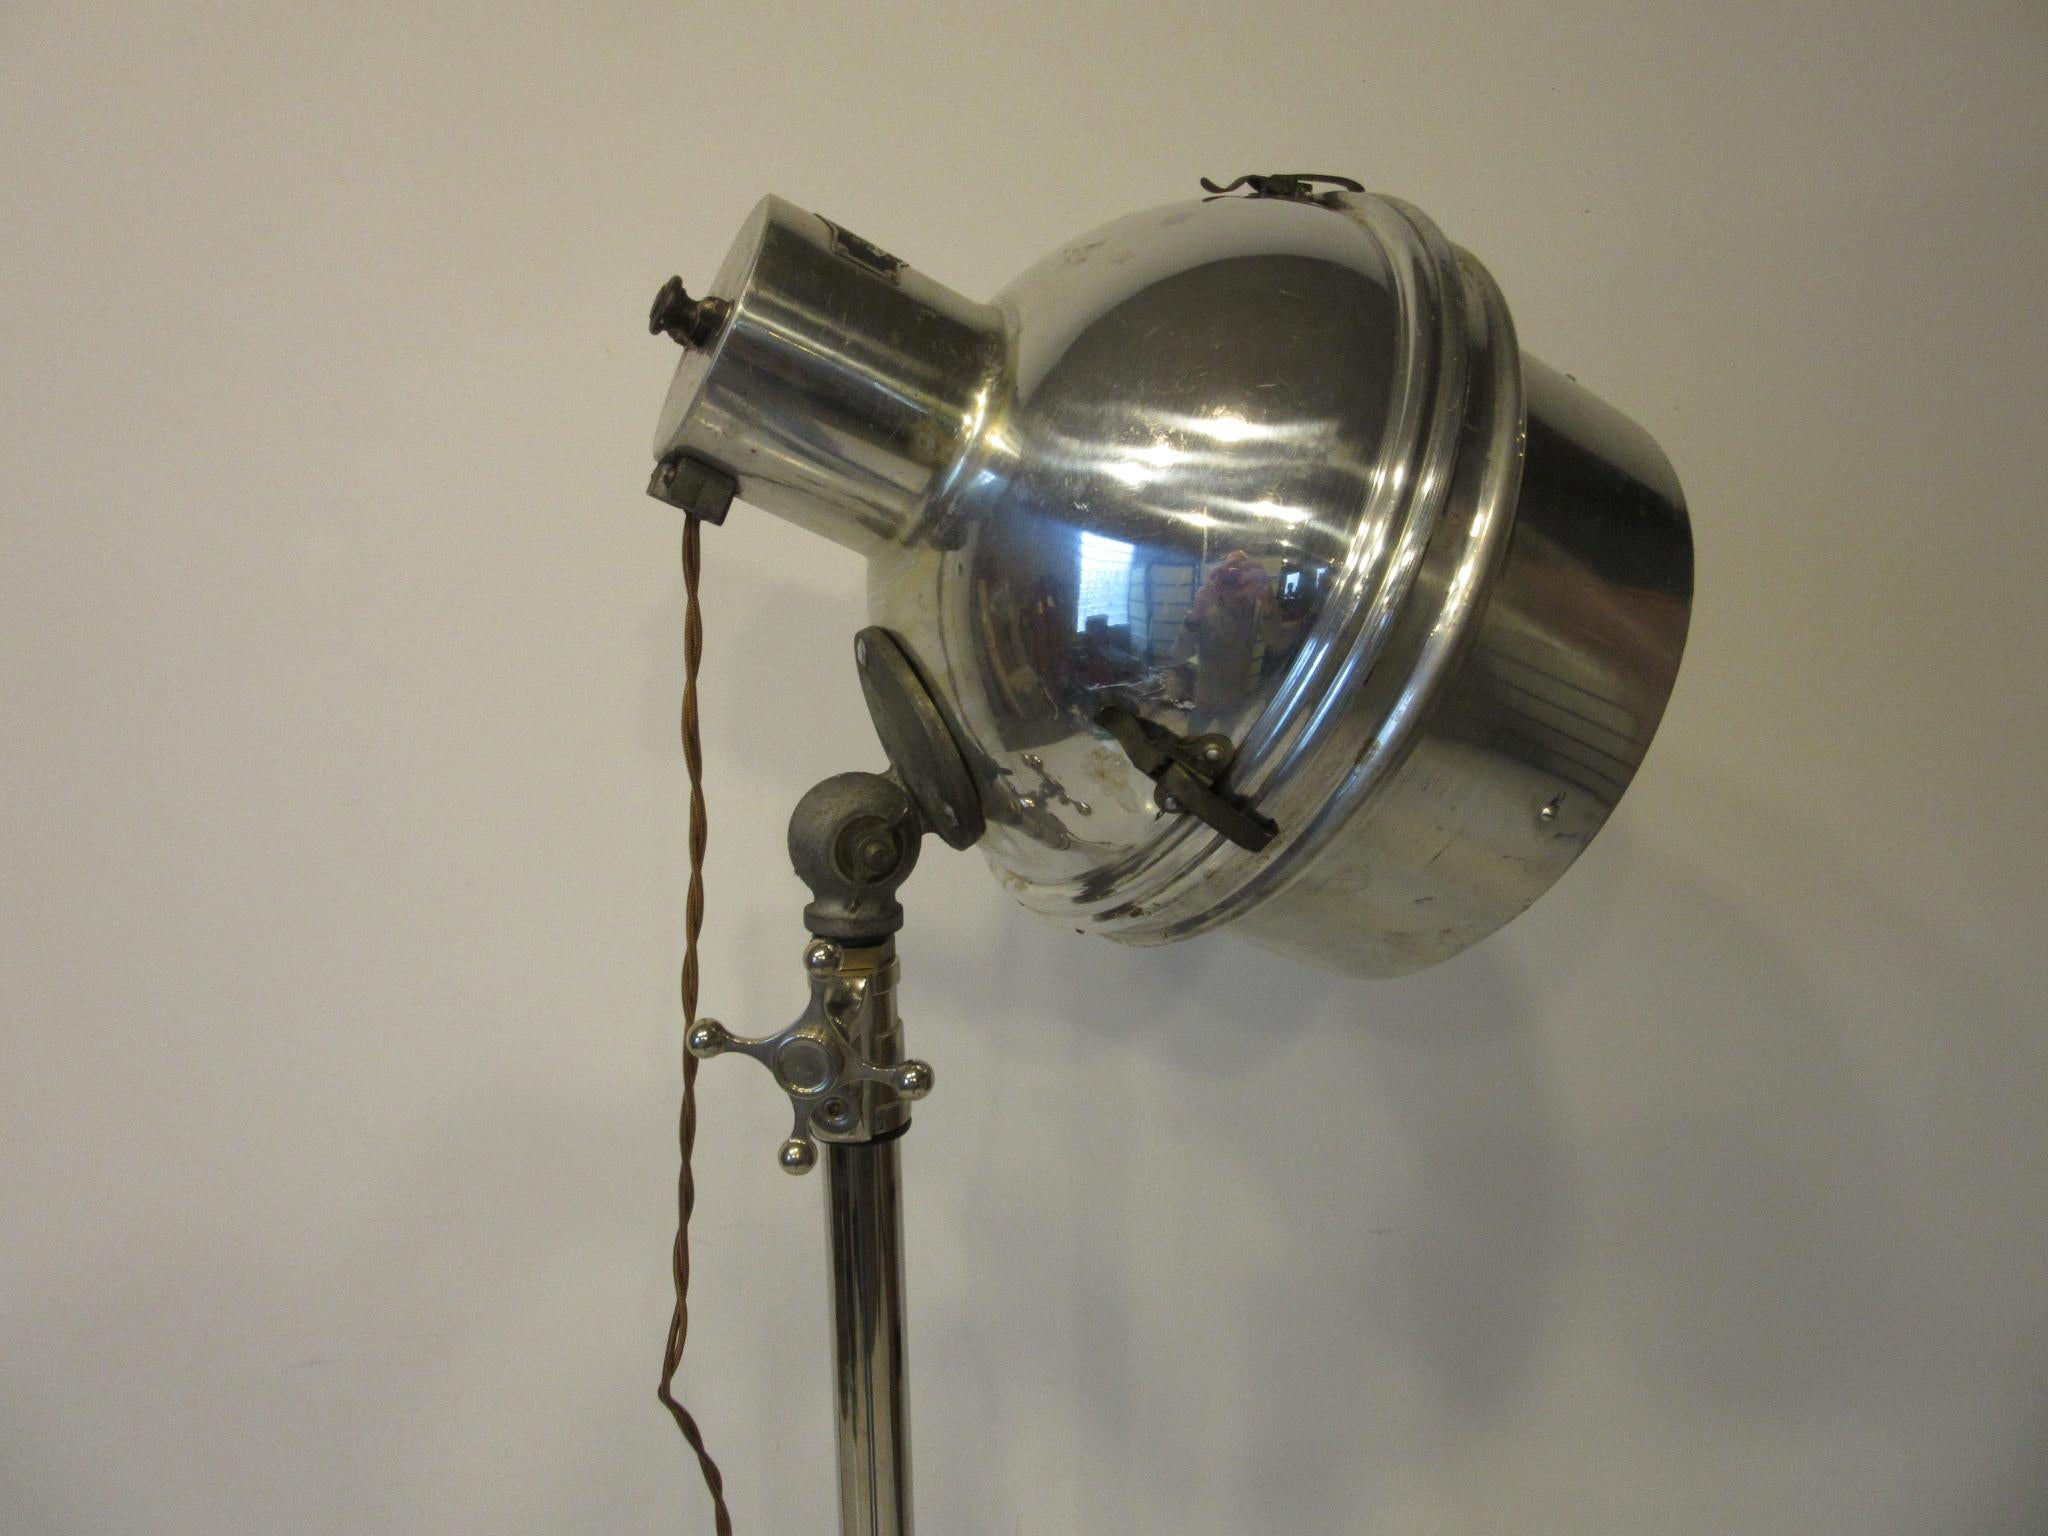 A industrial nickel chrome-plated adjustable floor lamp a large lamp head with a mercury toned reflector behind the bulb, big stylized knobs and great scissor base with built in feet to protect your floors. Has the repro old school looking